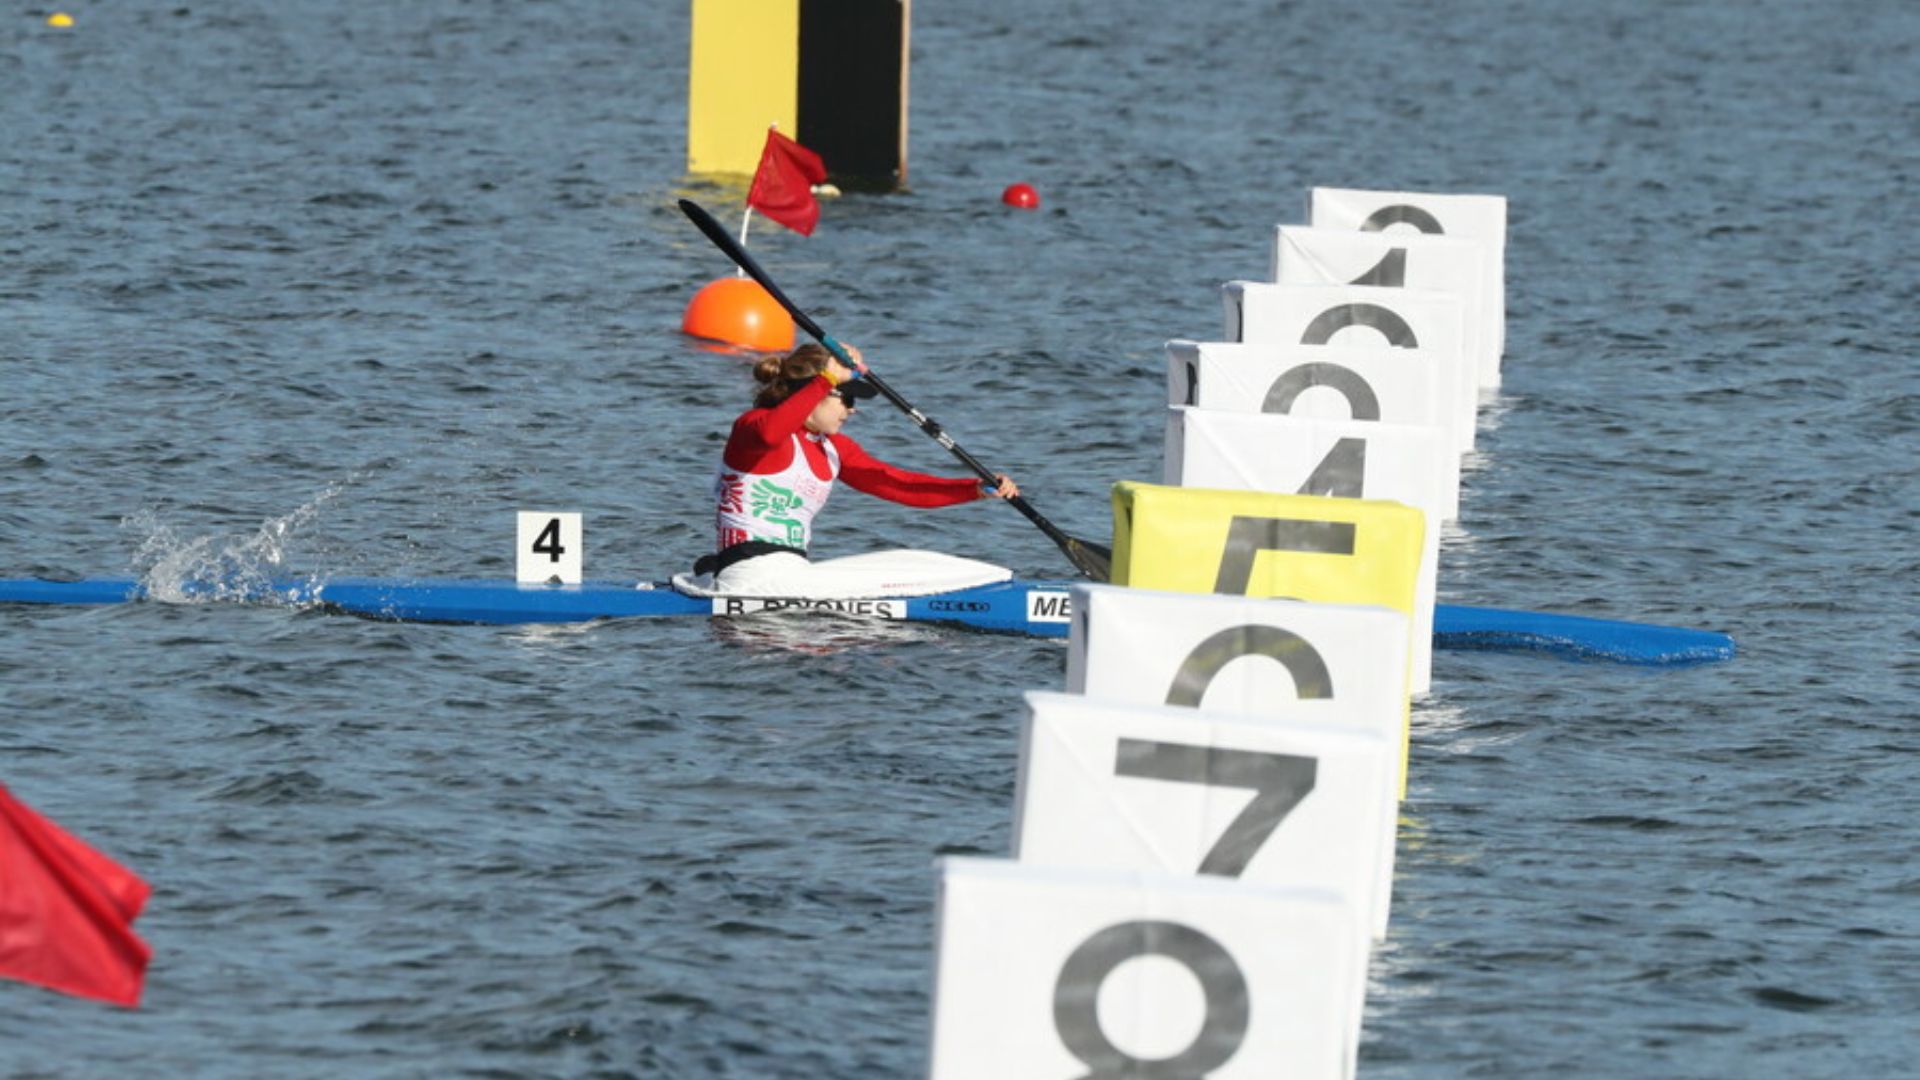 Speed Canoeing: Chile Qualifies for Two Finals